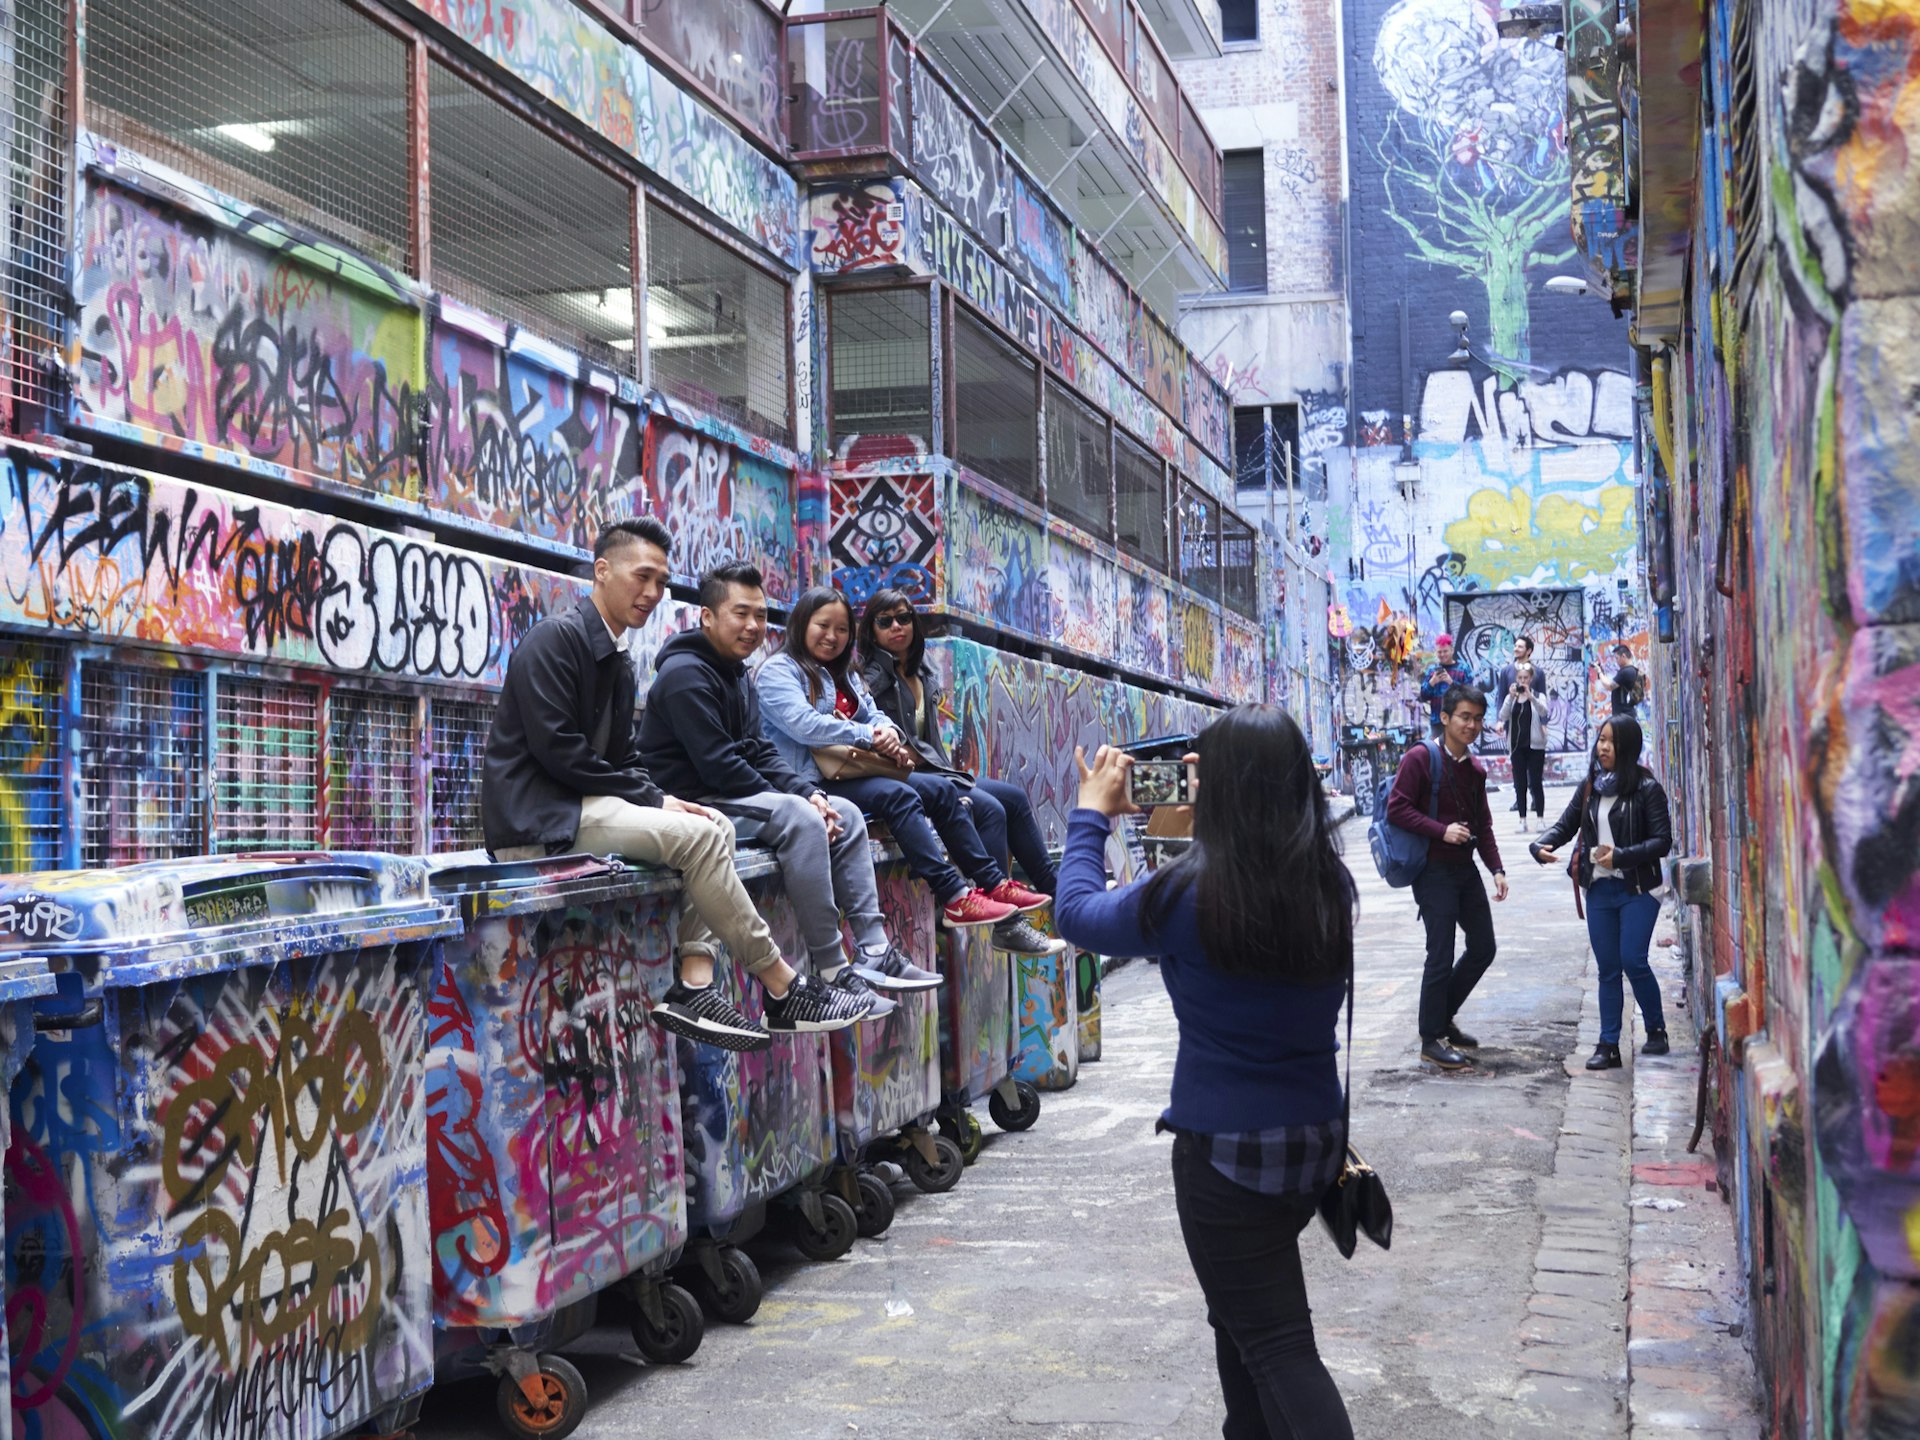 A woman taking pictures of friends in a graffiti-covered lane in Melbourne